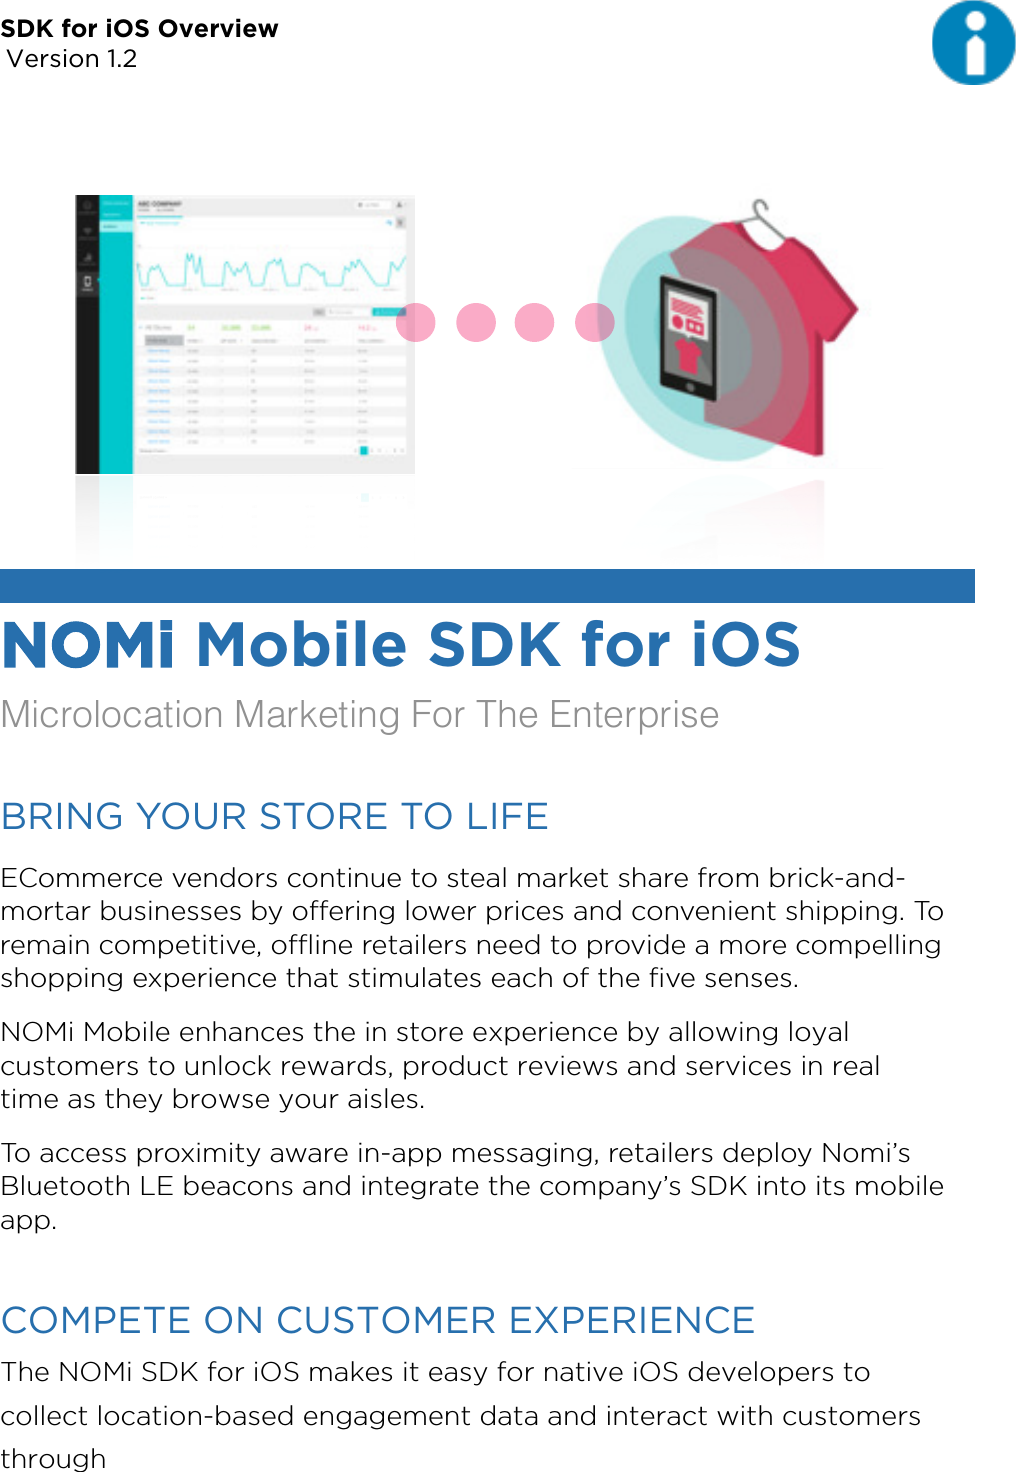 SDK for iOS Overview Version 1.2NOMi Mobile SDK for iOS Microlocation Marketing For The EnterpriseBRING YOUR STORE TO LIFE ECommerce vendors continue to steal market share from brick-and-mortar businesses by oﬀering lower prices and convenient shipping. To remain competitive, oﬄine retailers need to provide a more compelling shopping experience that stimulates each of the ﬁve senses. NOMi Mobile enhances the in store experience by allowing loyal customers to unlock rewards, product reviews and services in real time as they browse your aisles. To access proximity aware in-app messaging, retailers deploy Nomi’s Bluetooth LE beacons and integrate the company’s SDK into its mobile app. COMPETE ON CUSTOMER EXPERIENCE The NOMi SDK for iOS makes it easy for native iOS developers to collect location-based engagement data and interact with customers through 